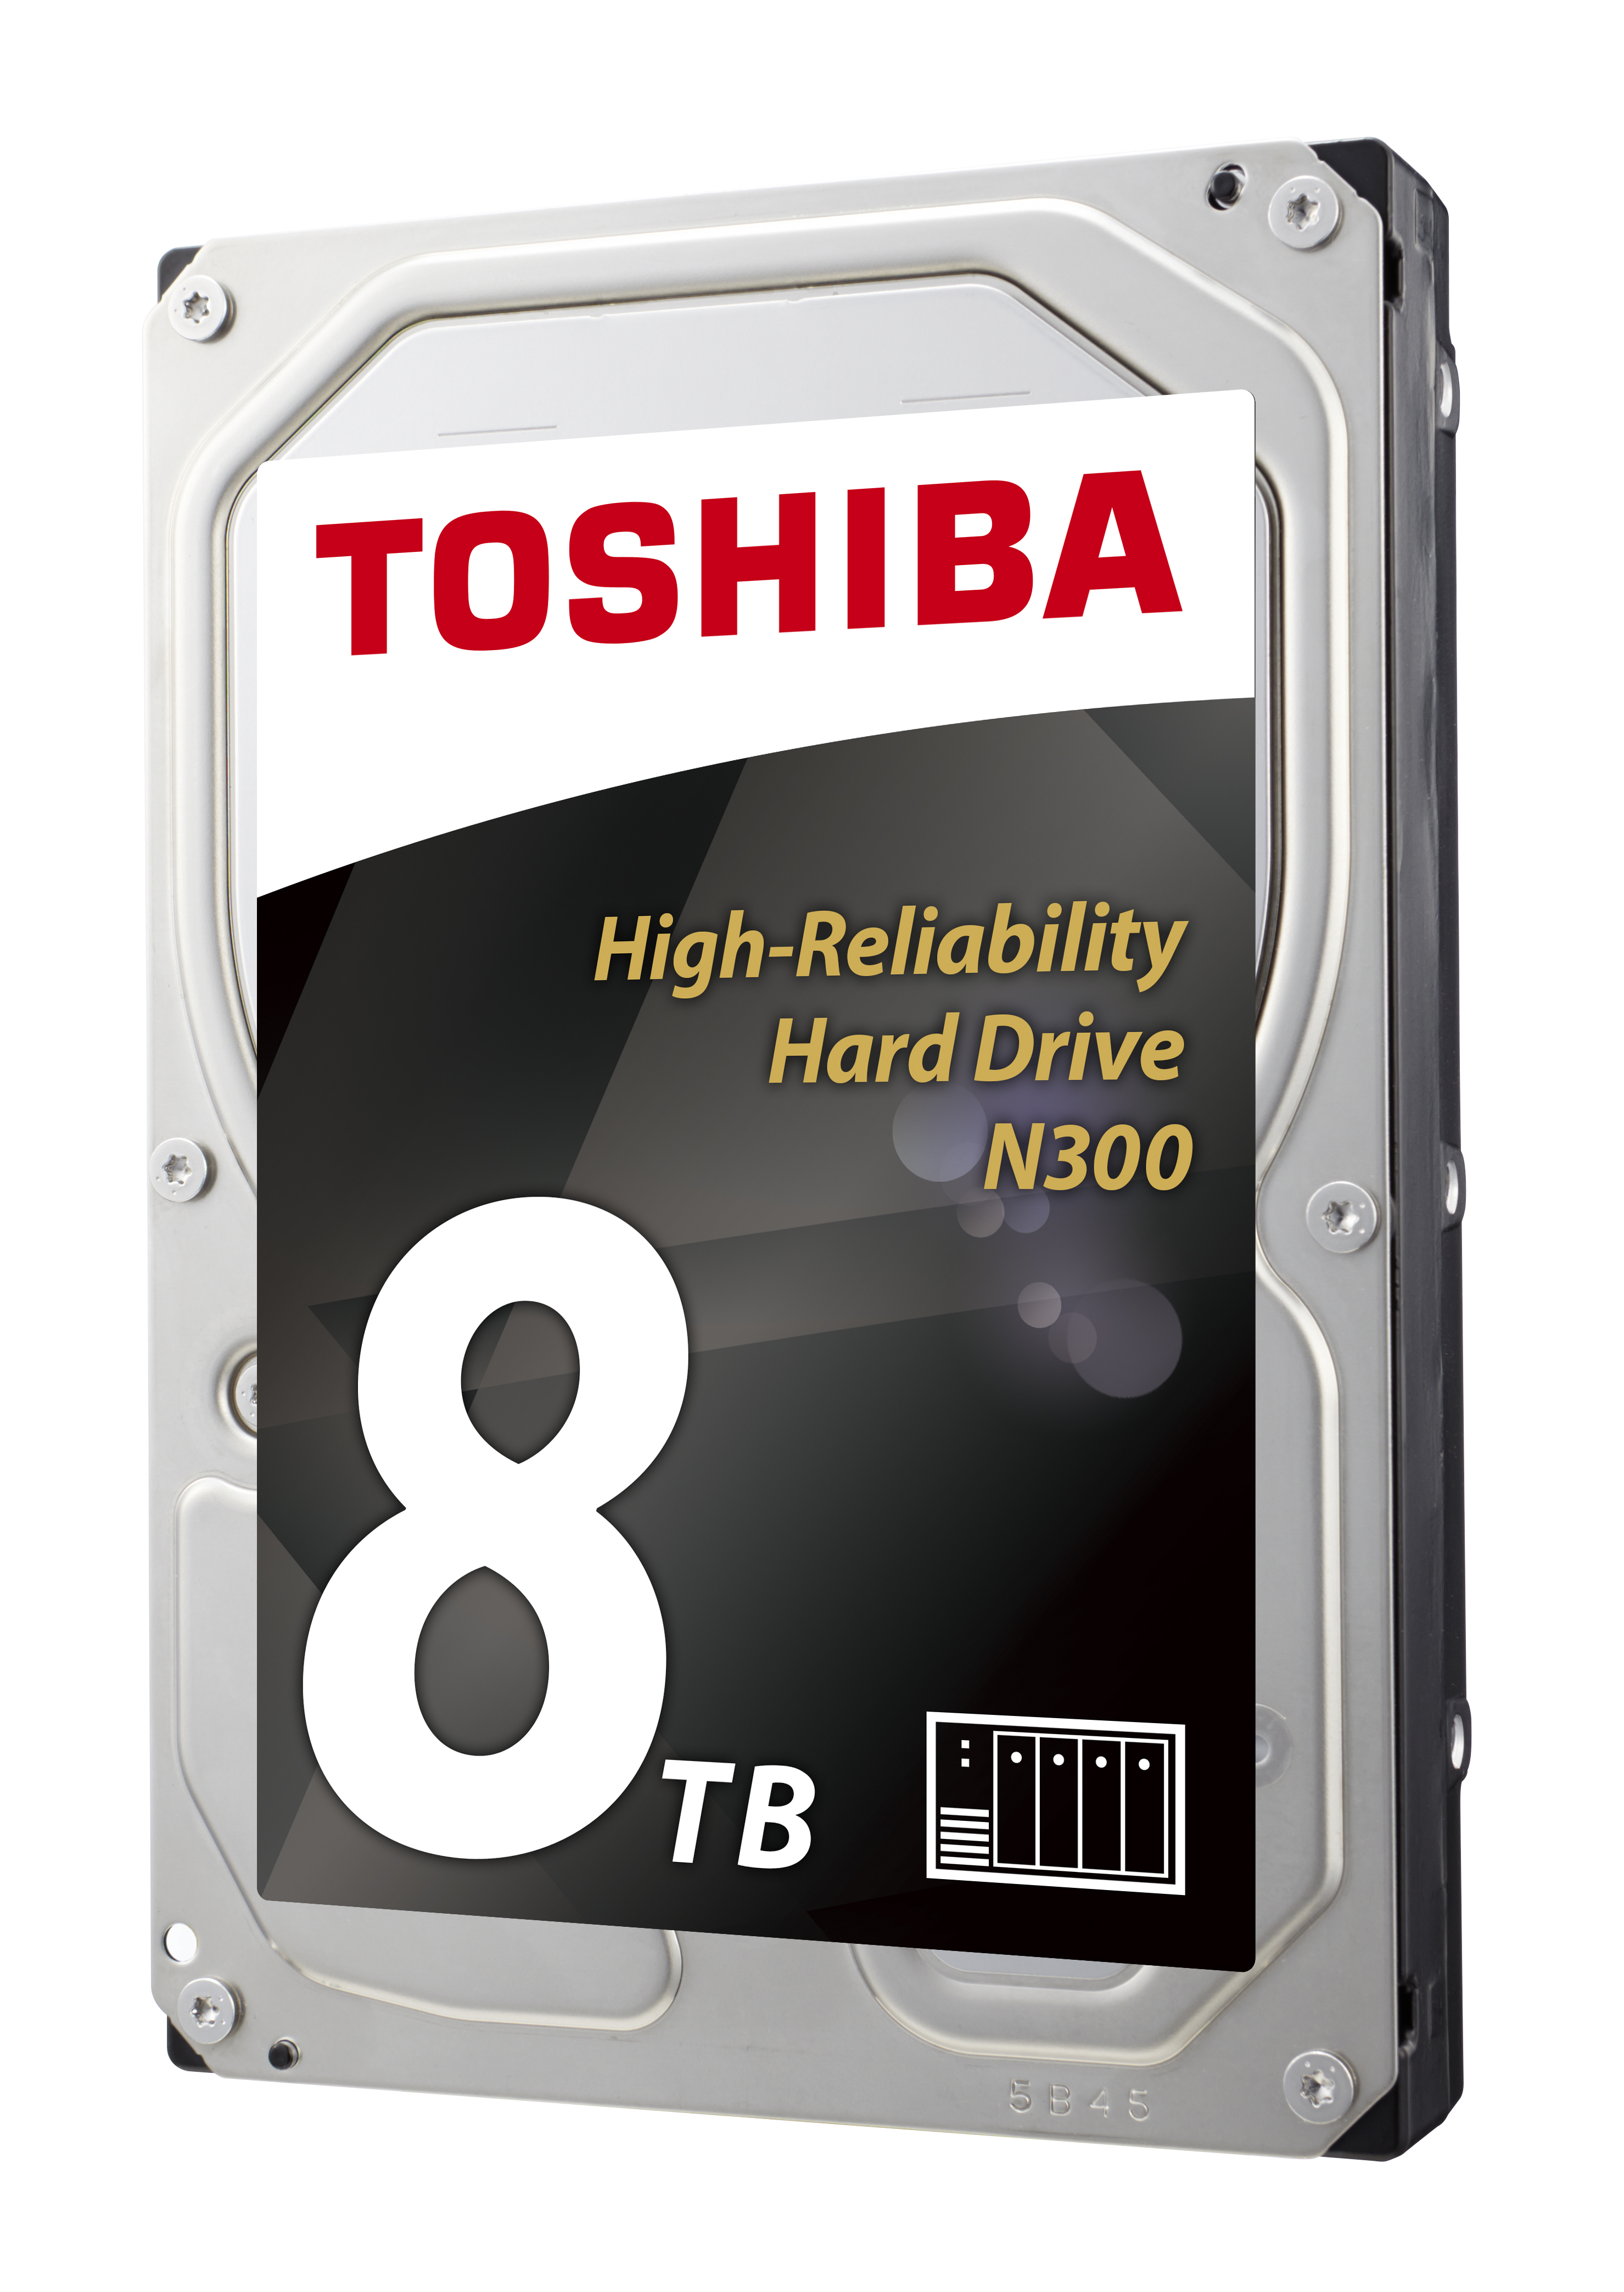 TOSHIBA LAUNCHES HIGH-RELIABILITY HARD DRIVE N300 FOR NAS  WITH CAPACITIES OF UP TO 8TB